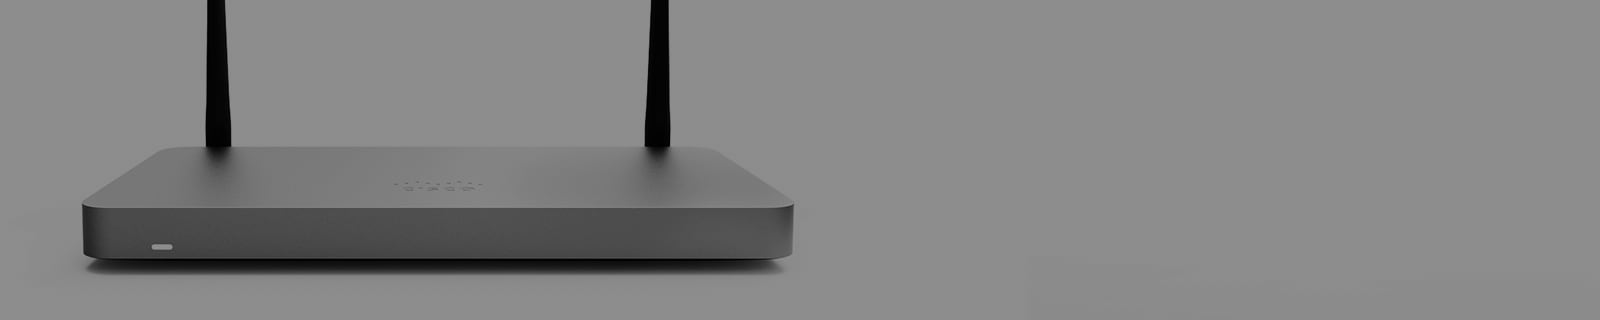 router-marquee-1600x320